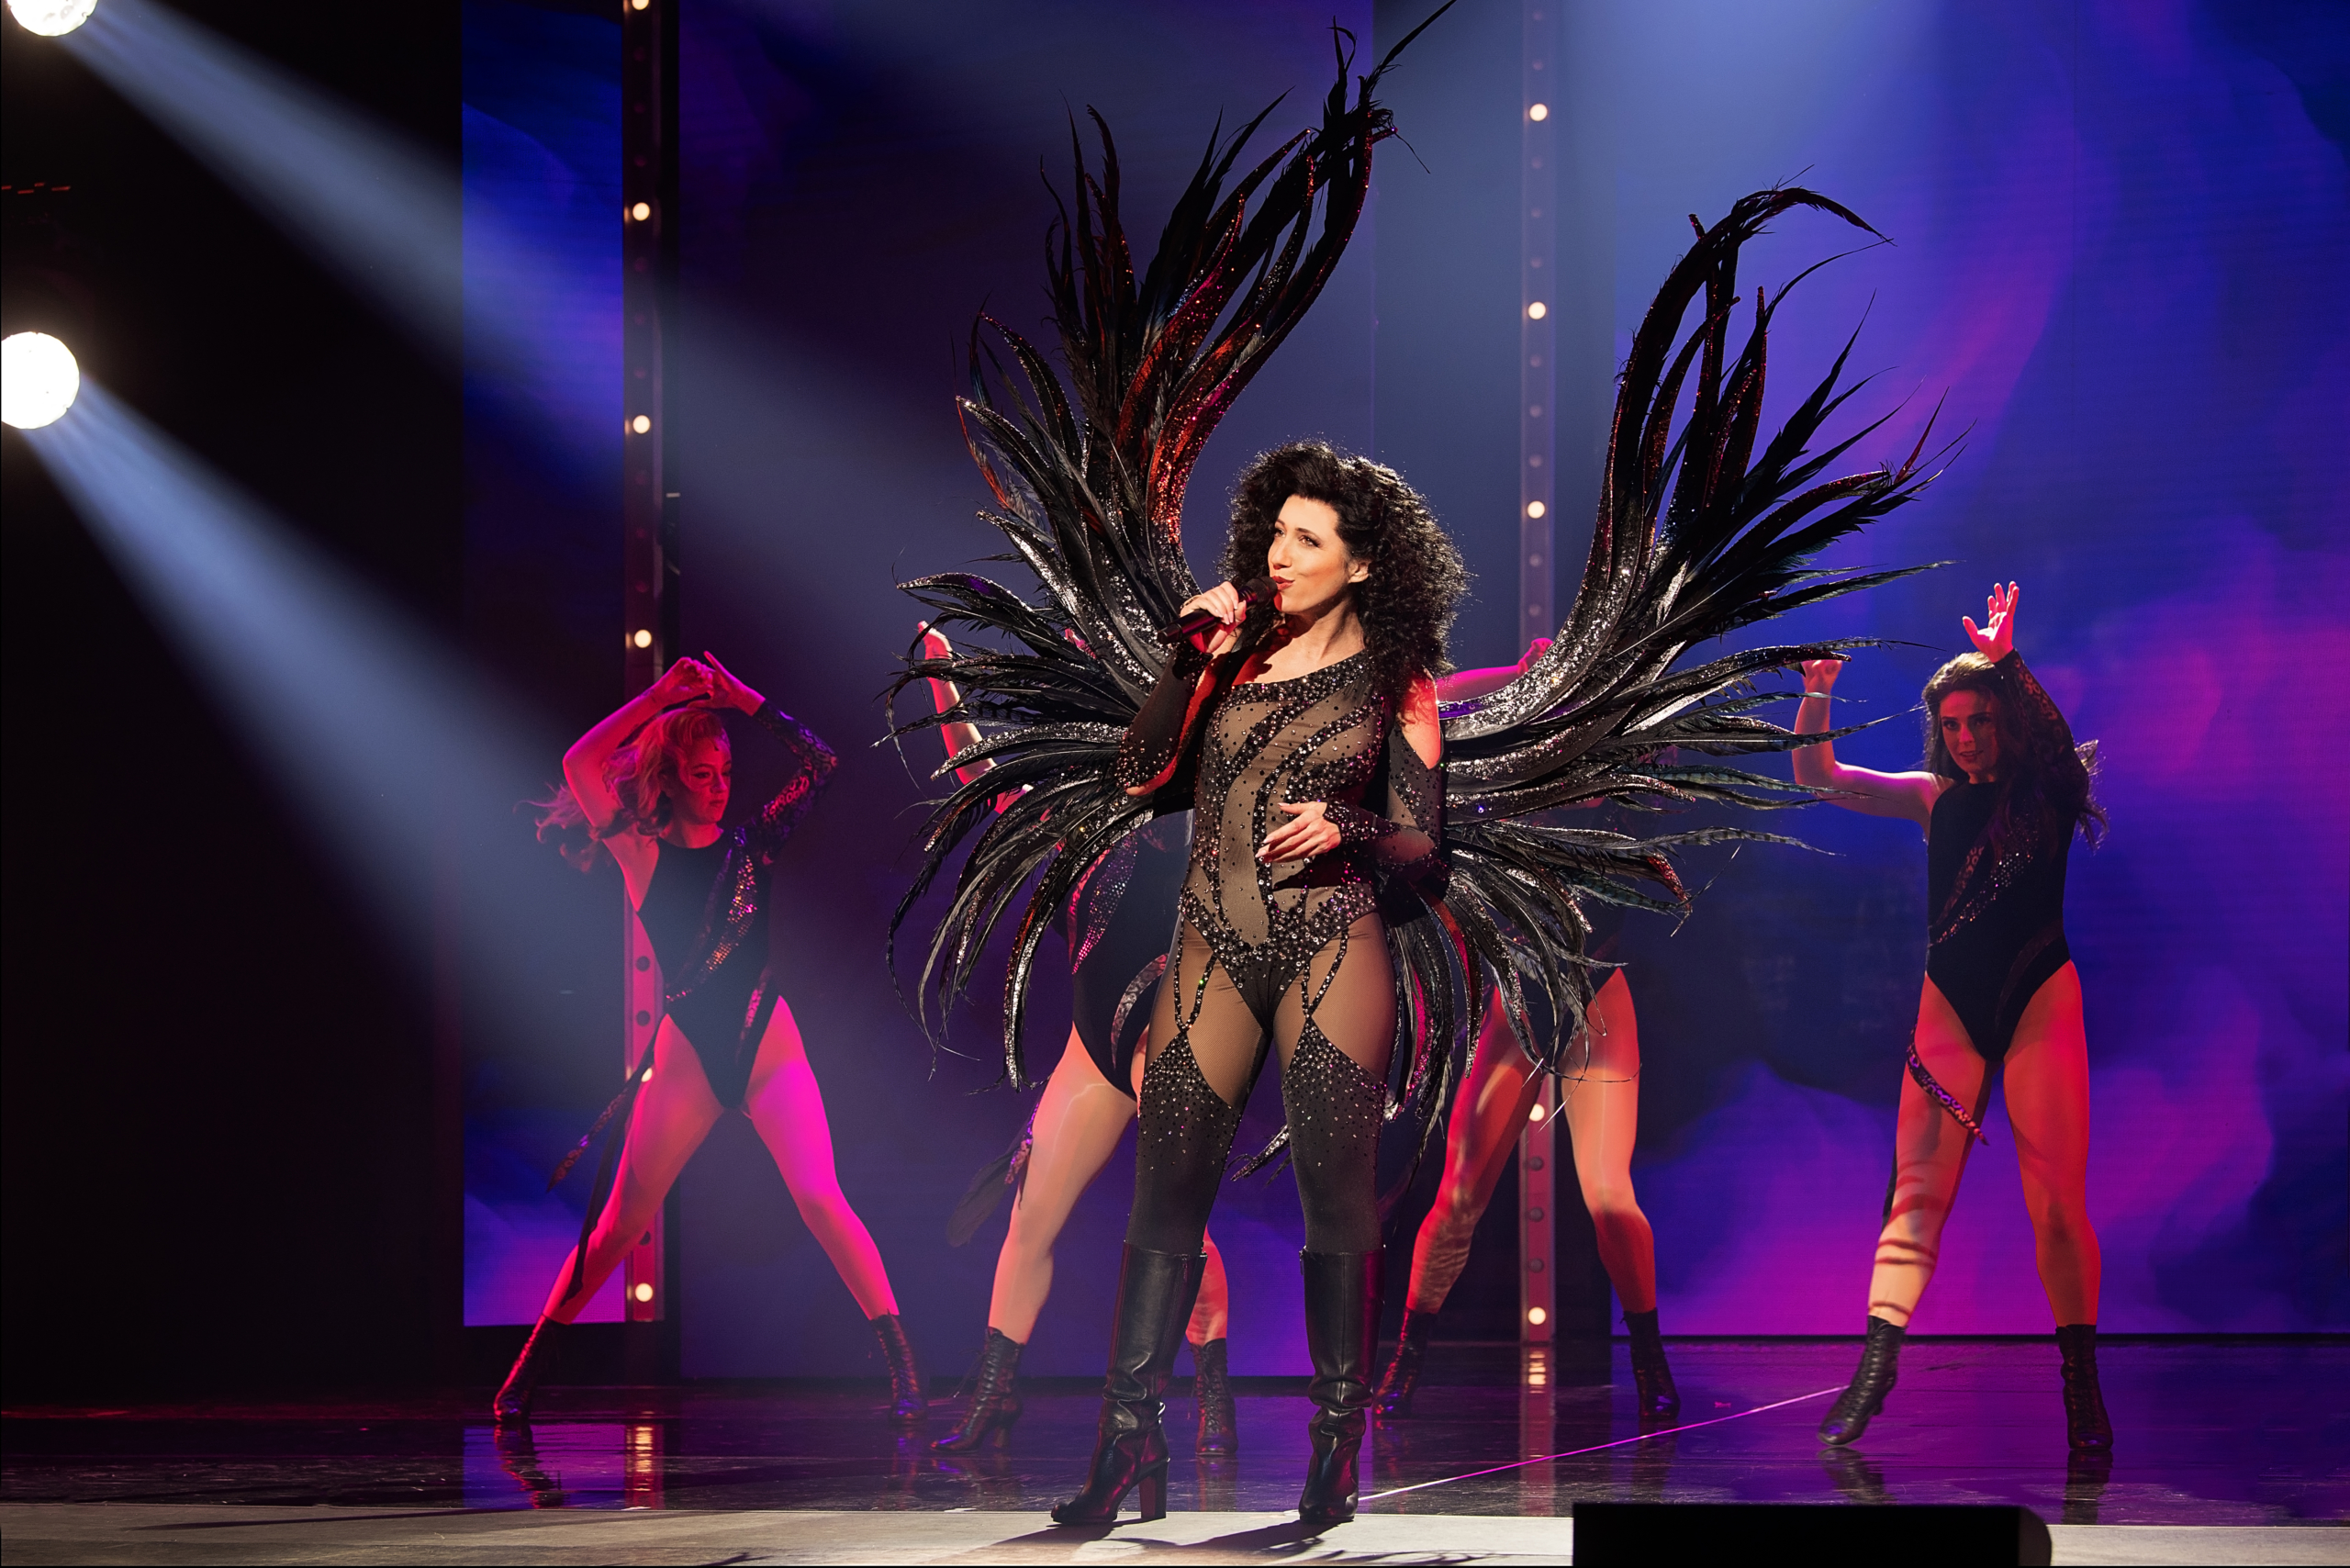 The Cher Show – National Tour of The Cher Show